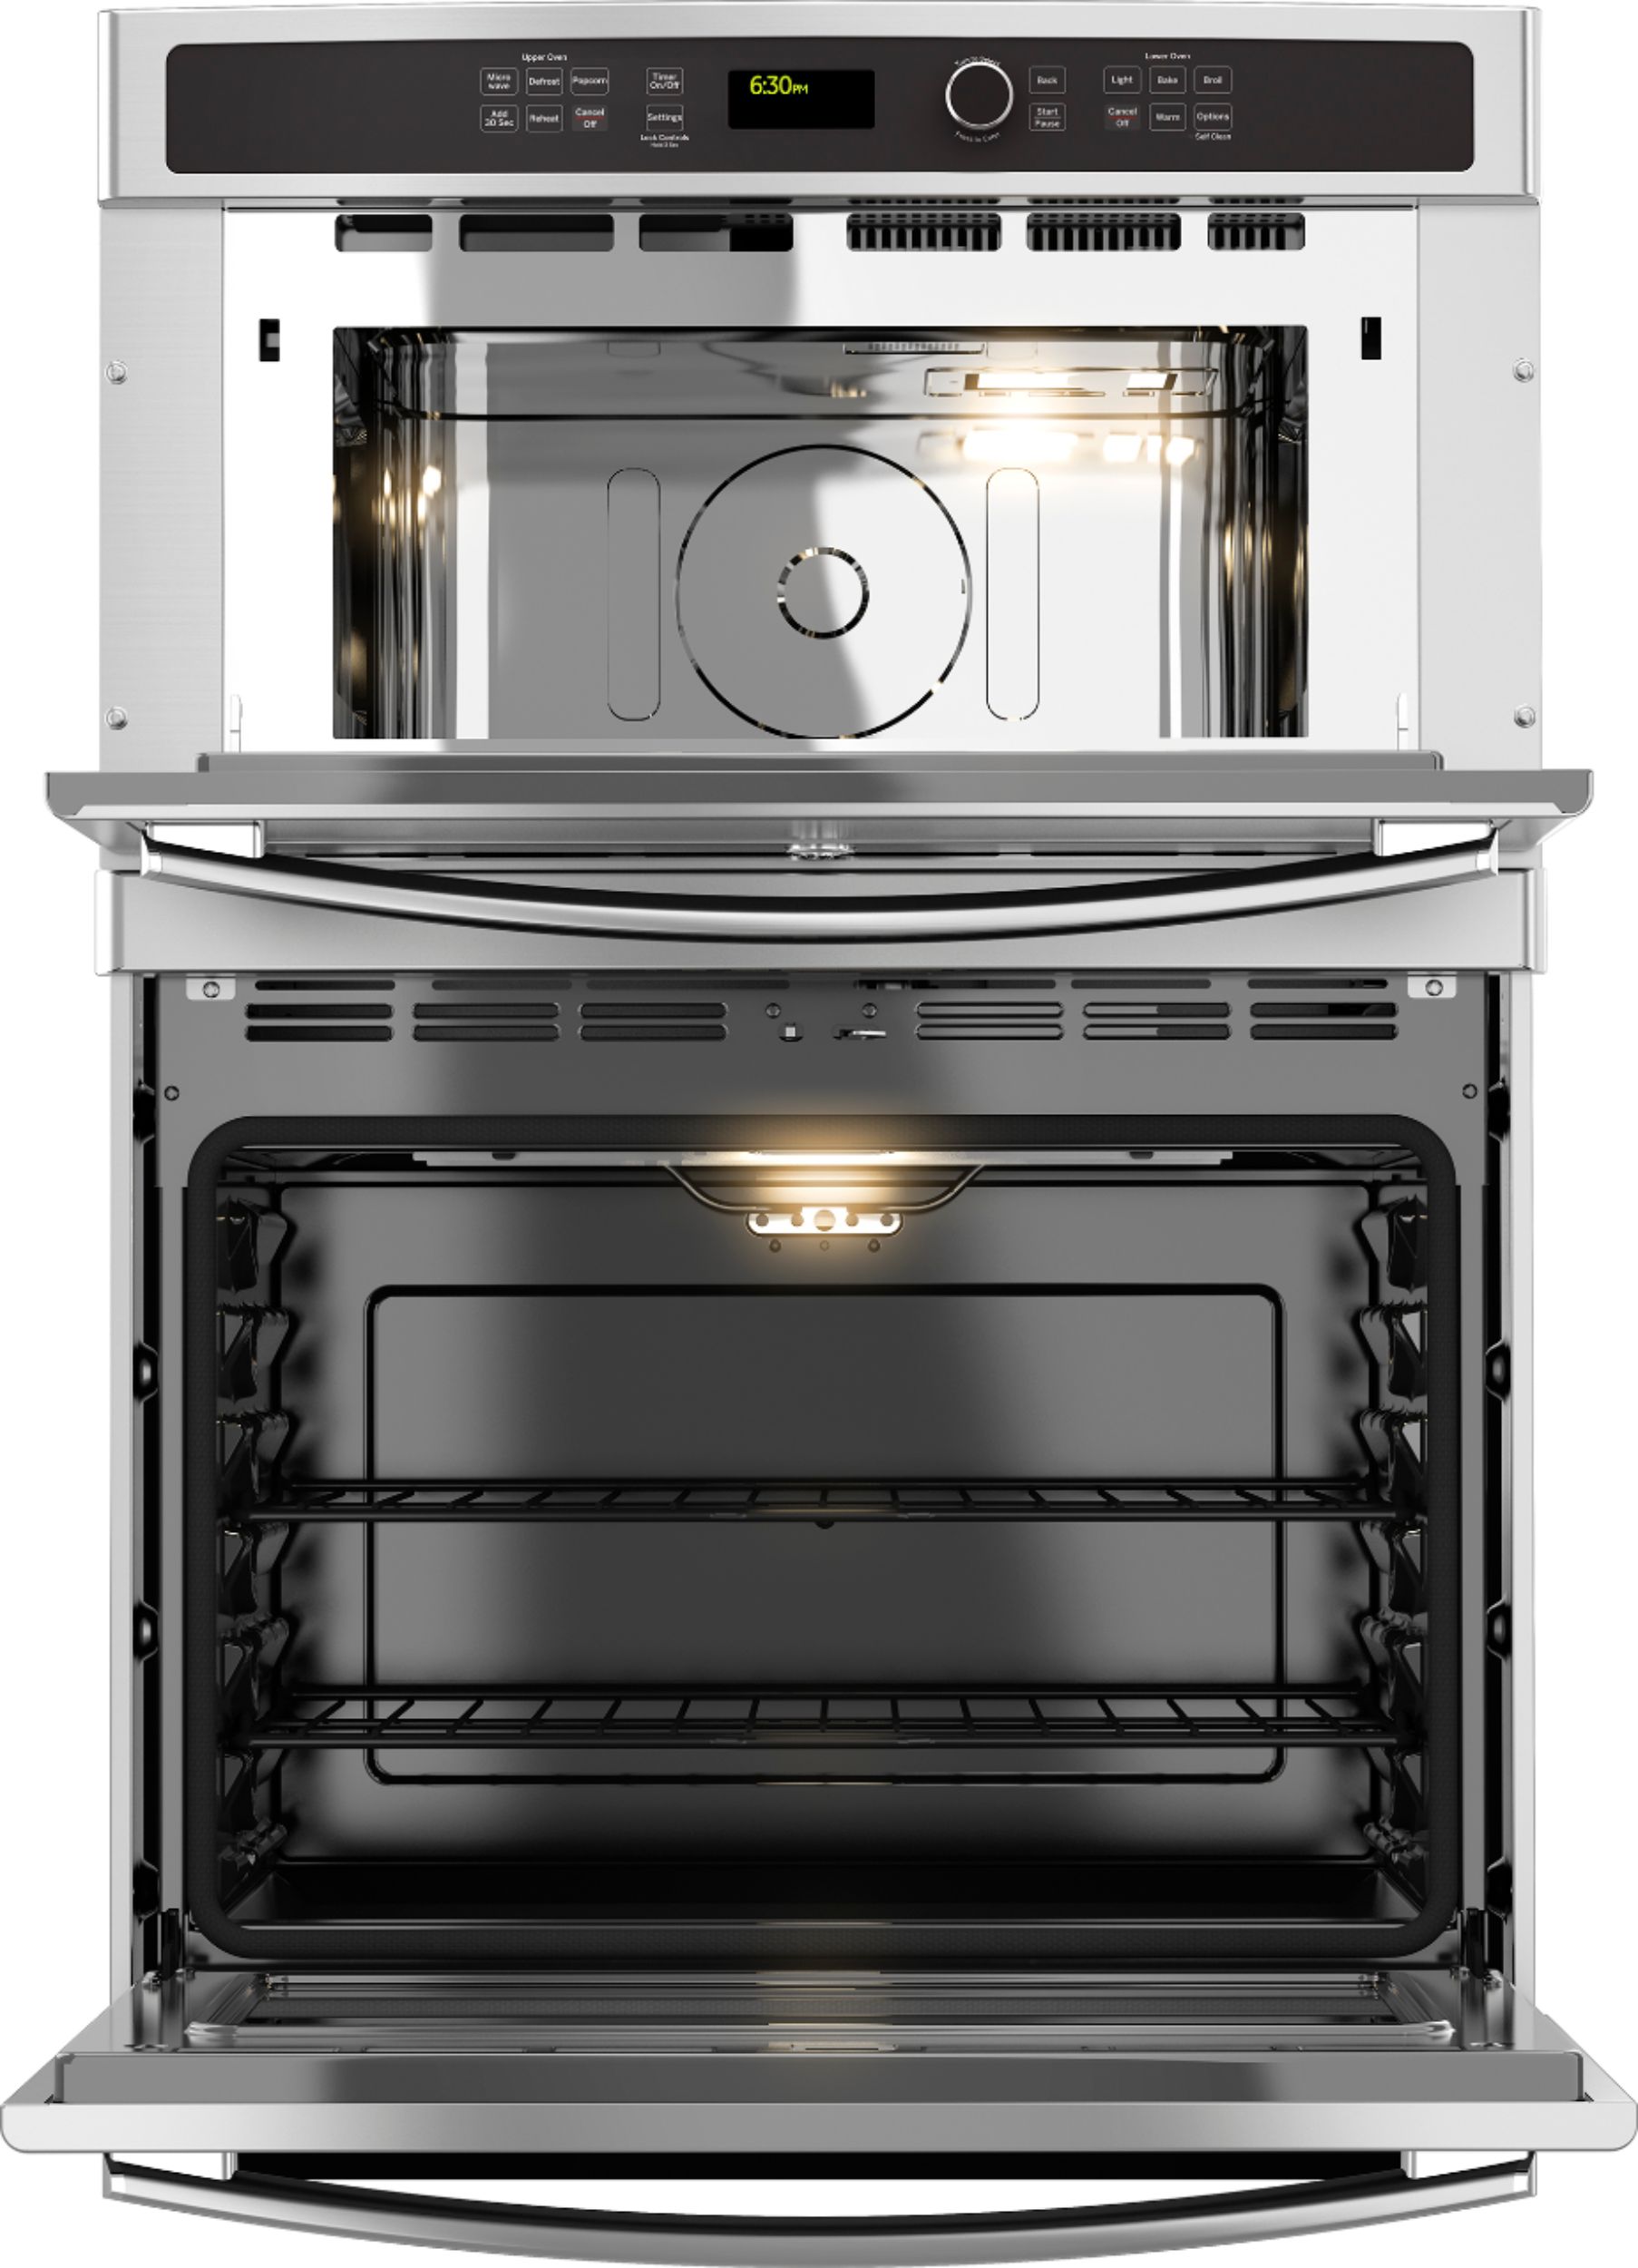 Angle View: KitchenAid - 30" Built-In Double Electric Convection Wall Oven - Black Stainless Steel